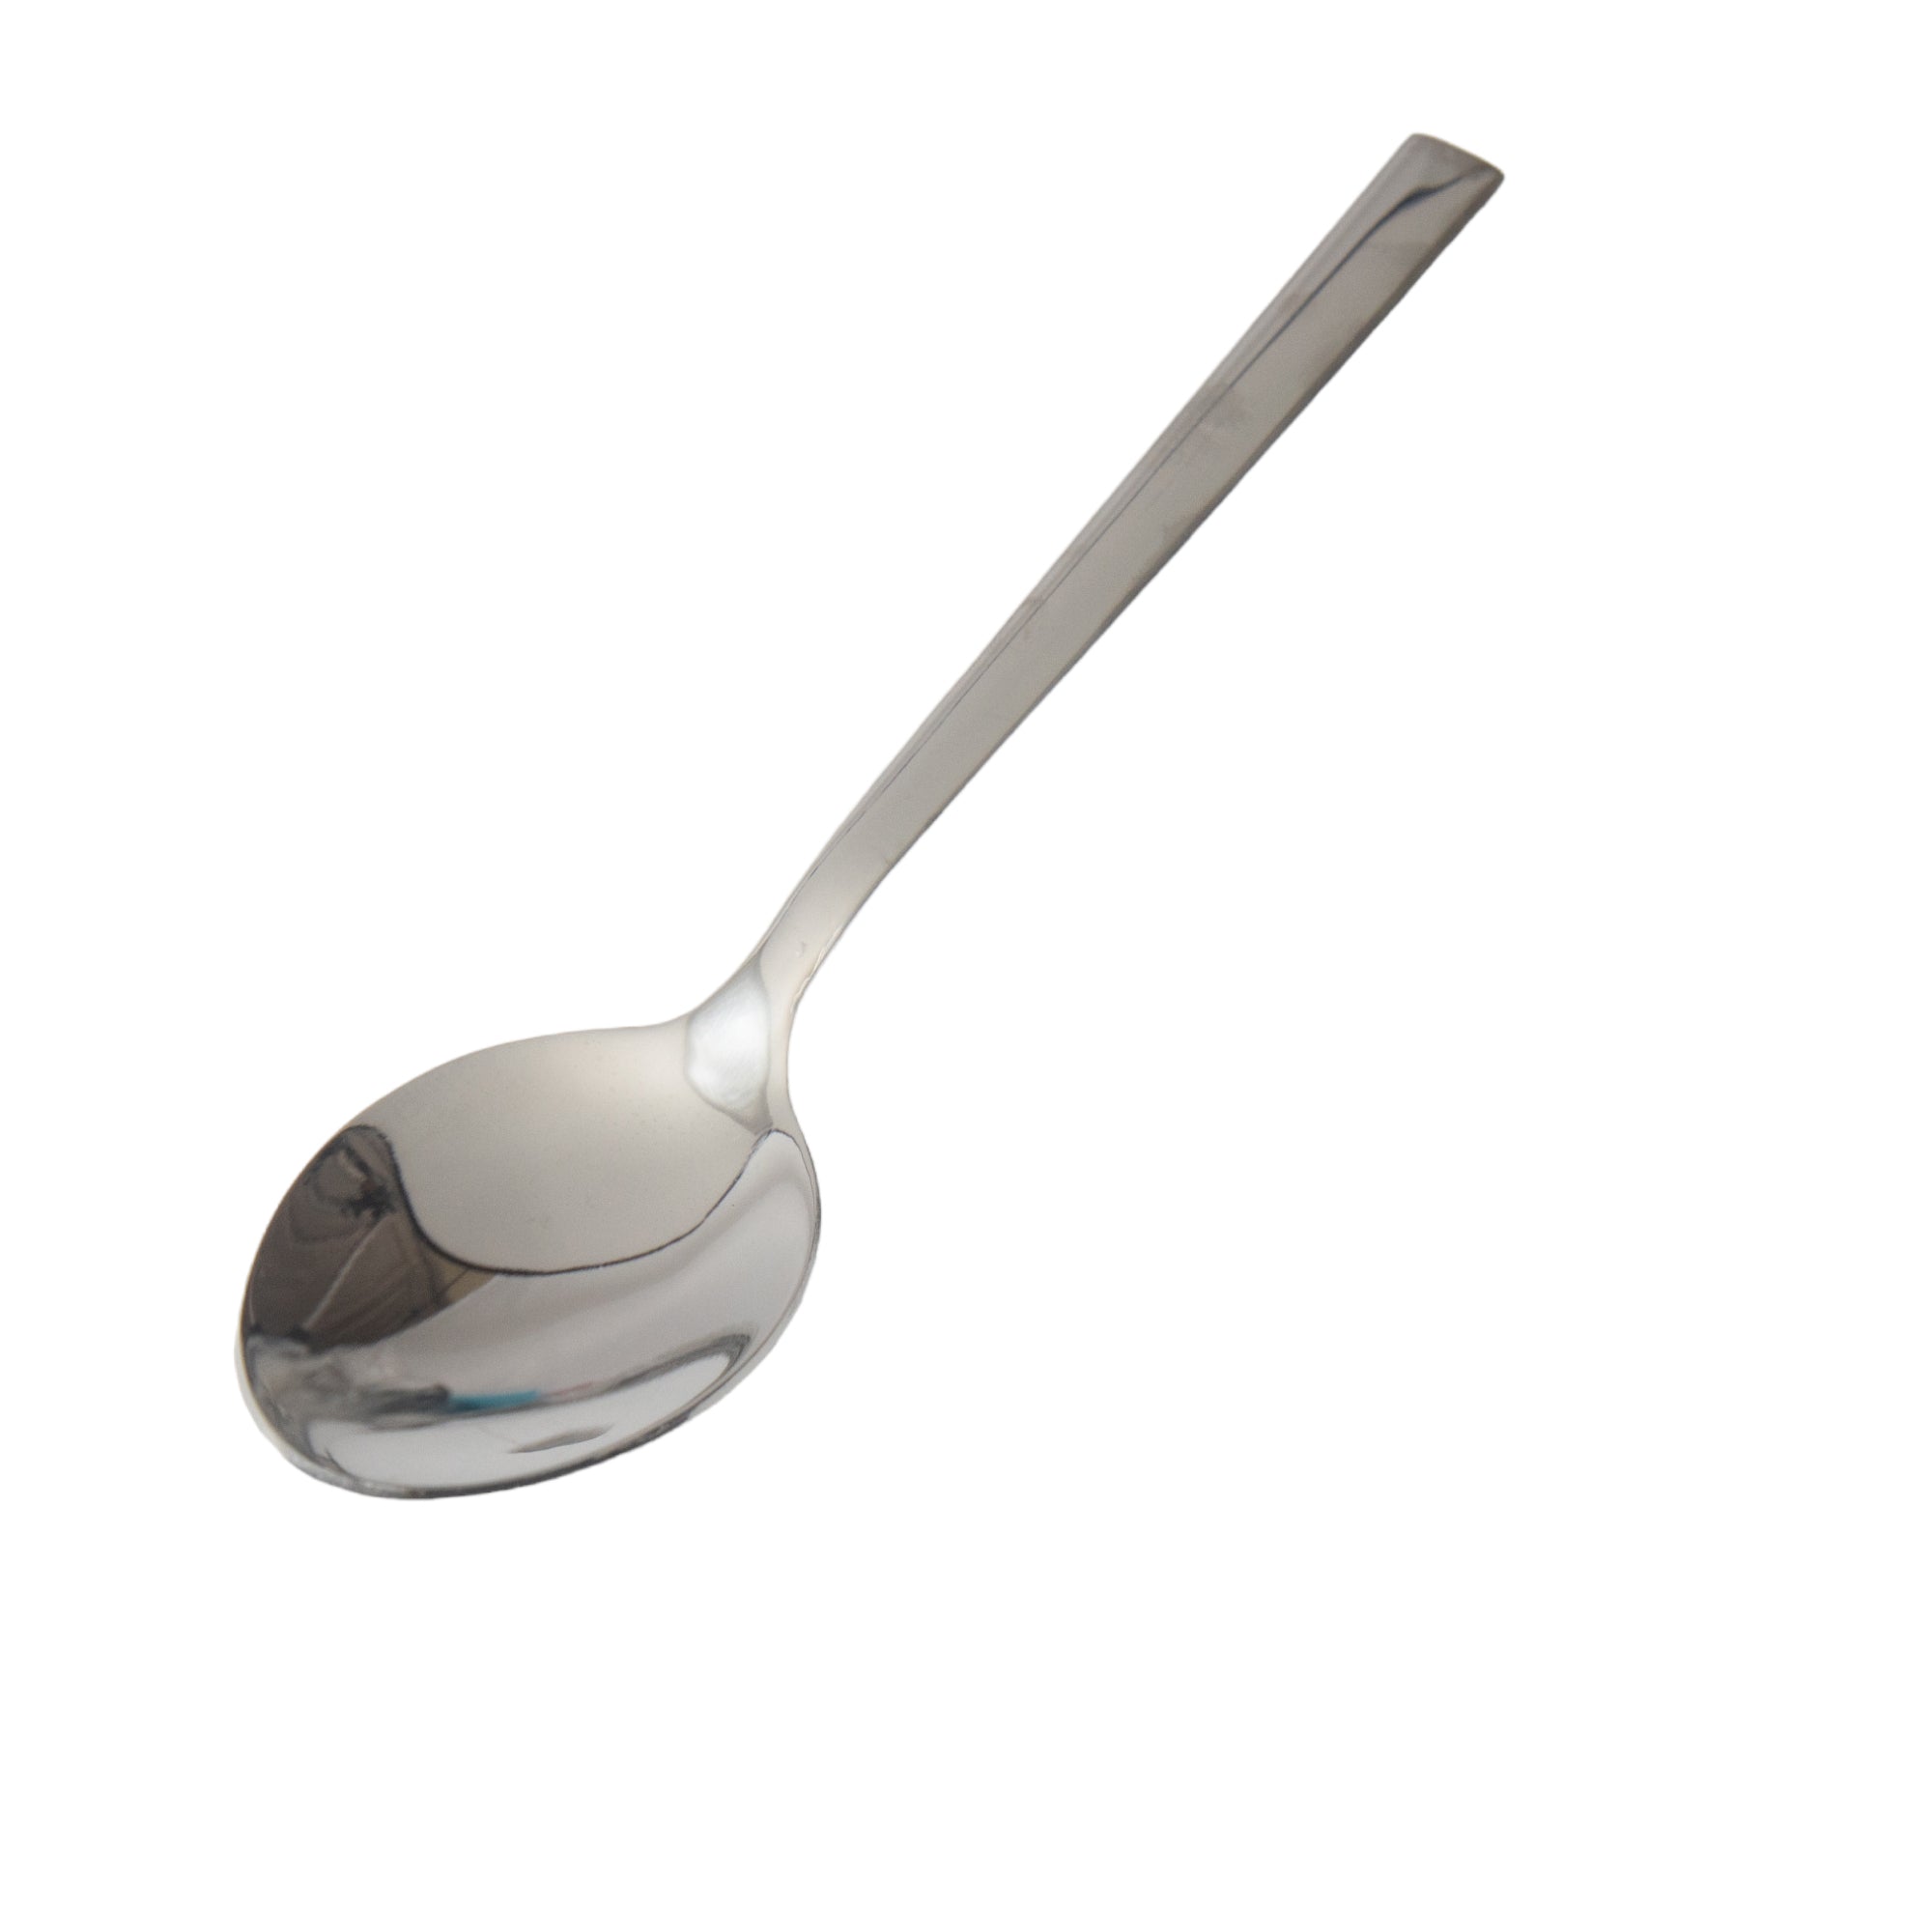 Stainless Steel Dessert Spoon 6pcs Square Handle CT785